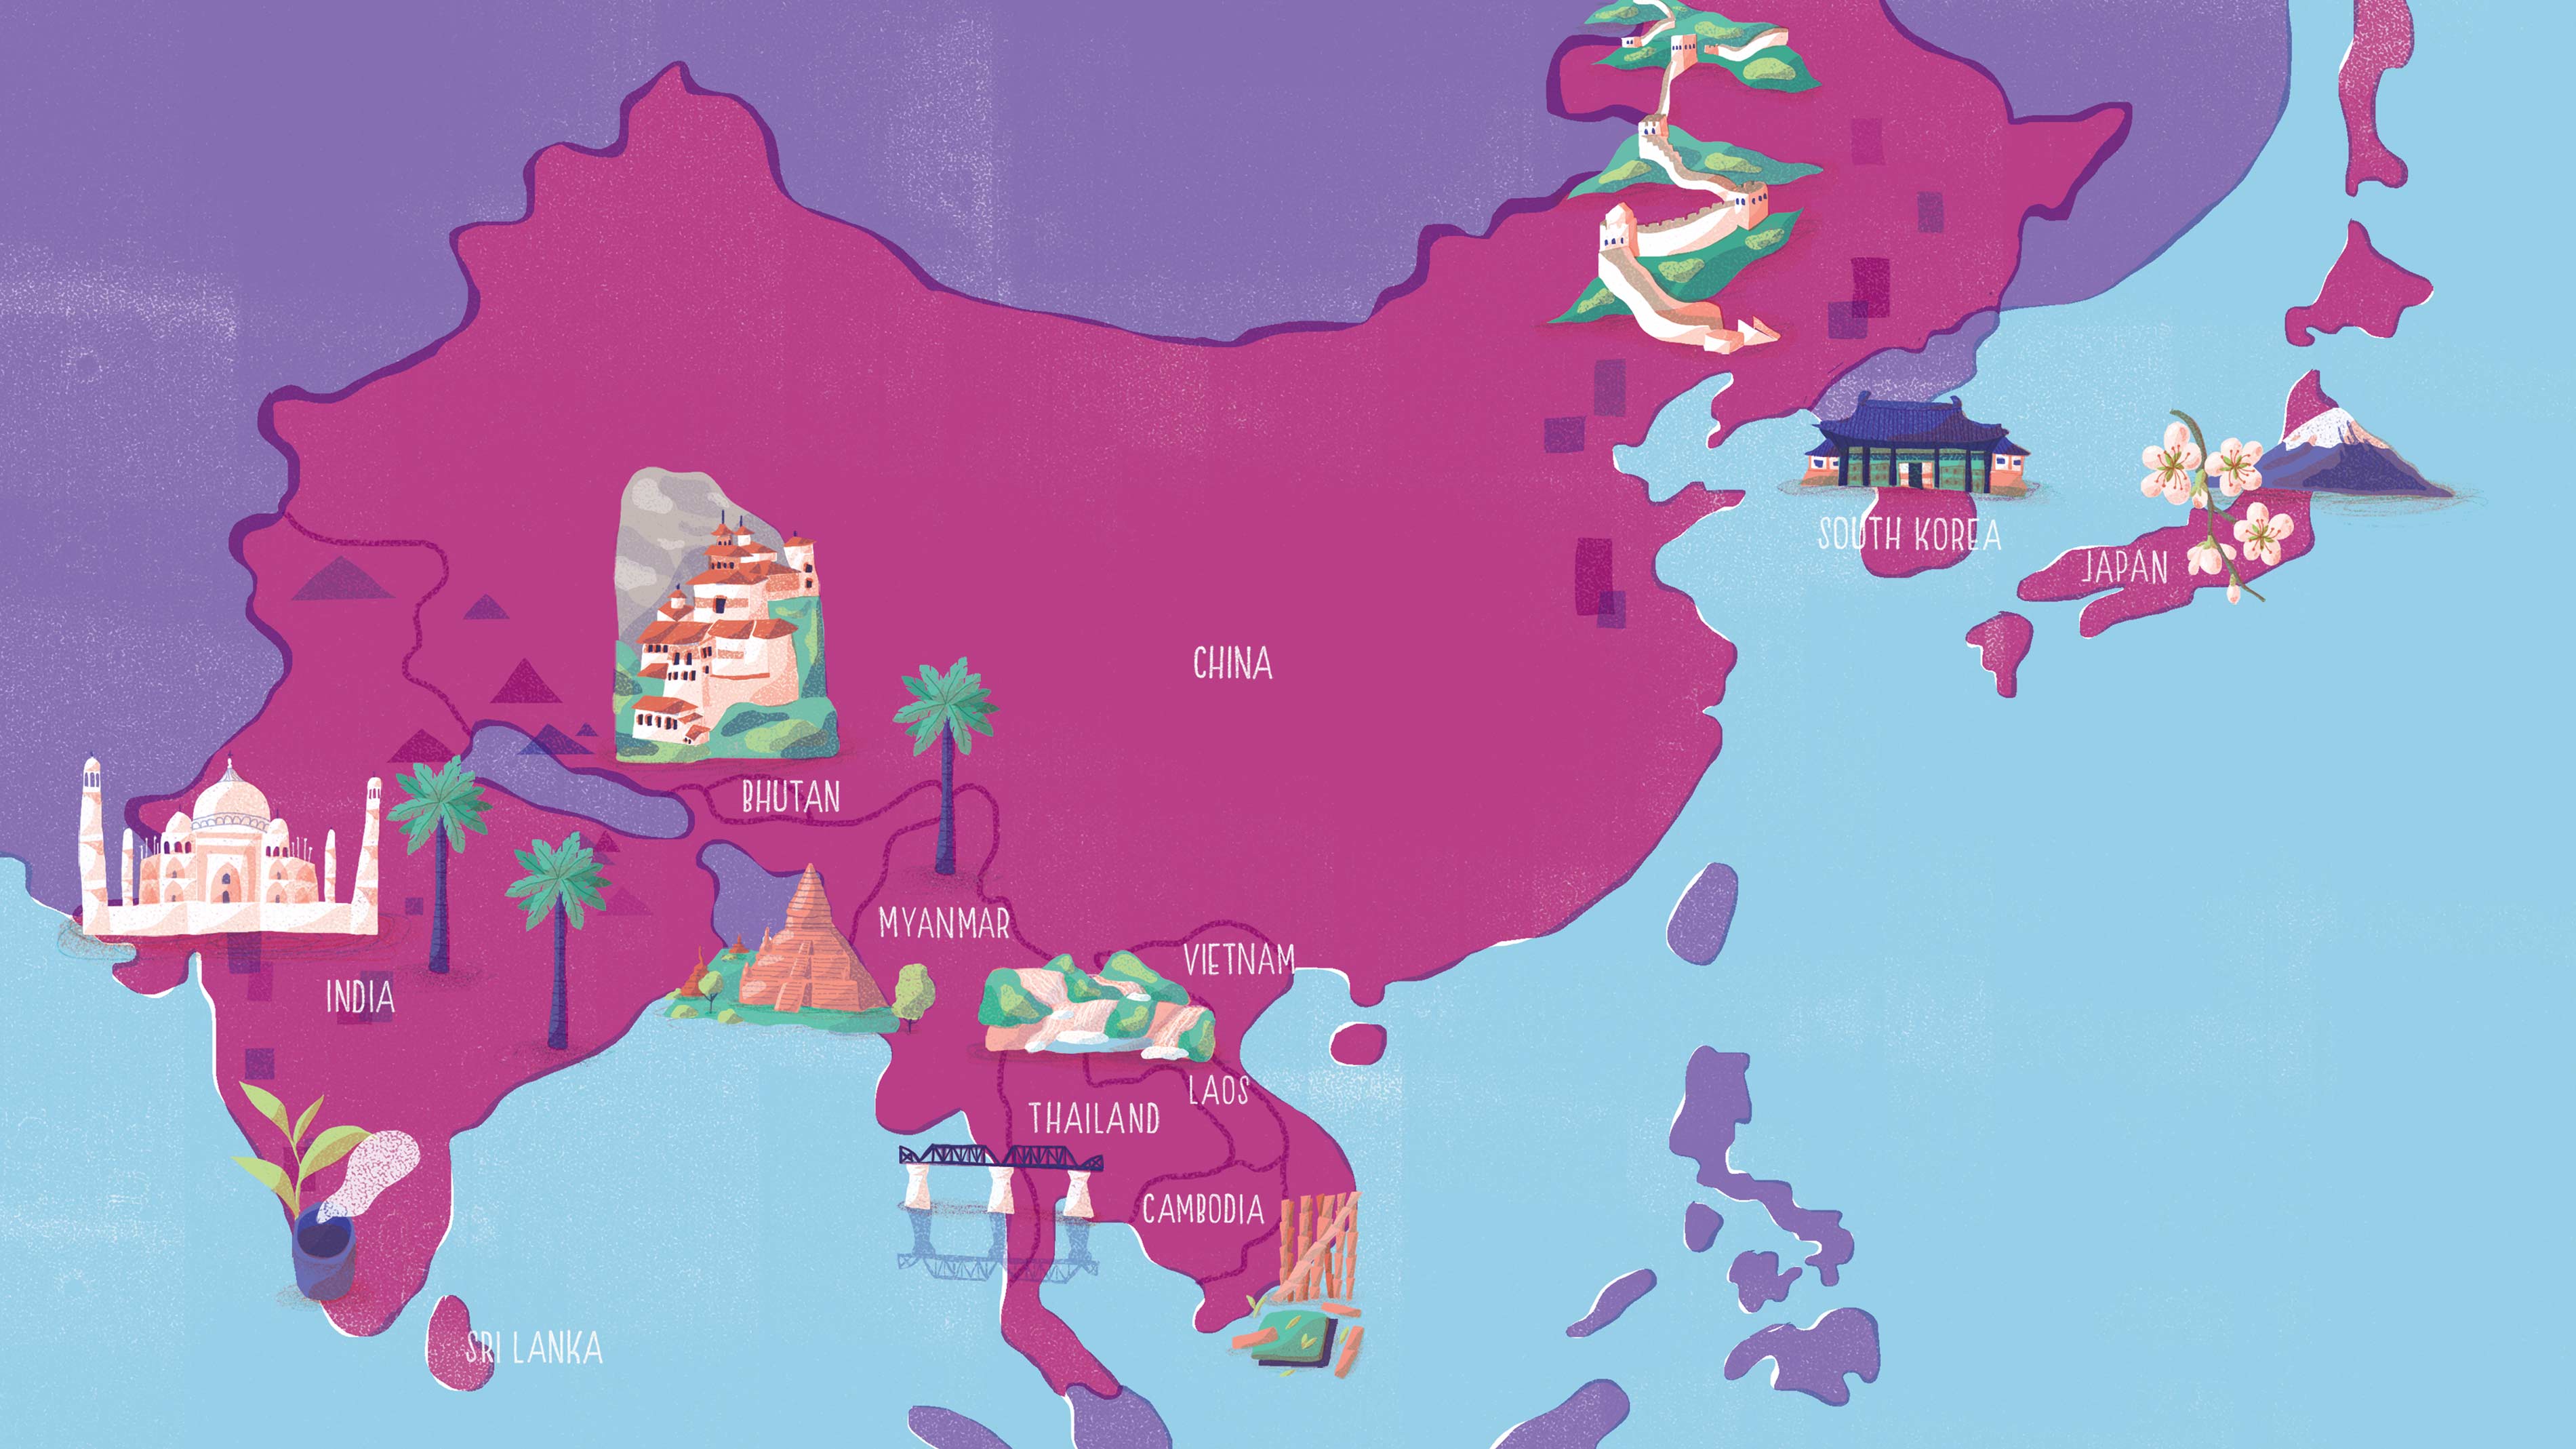 Maps design that transports your customers to another world